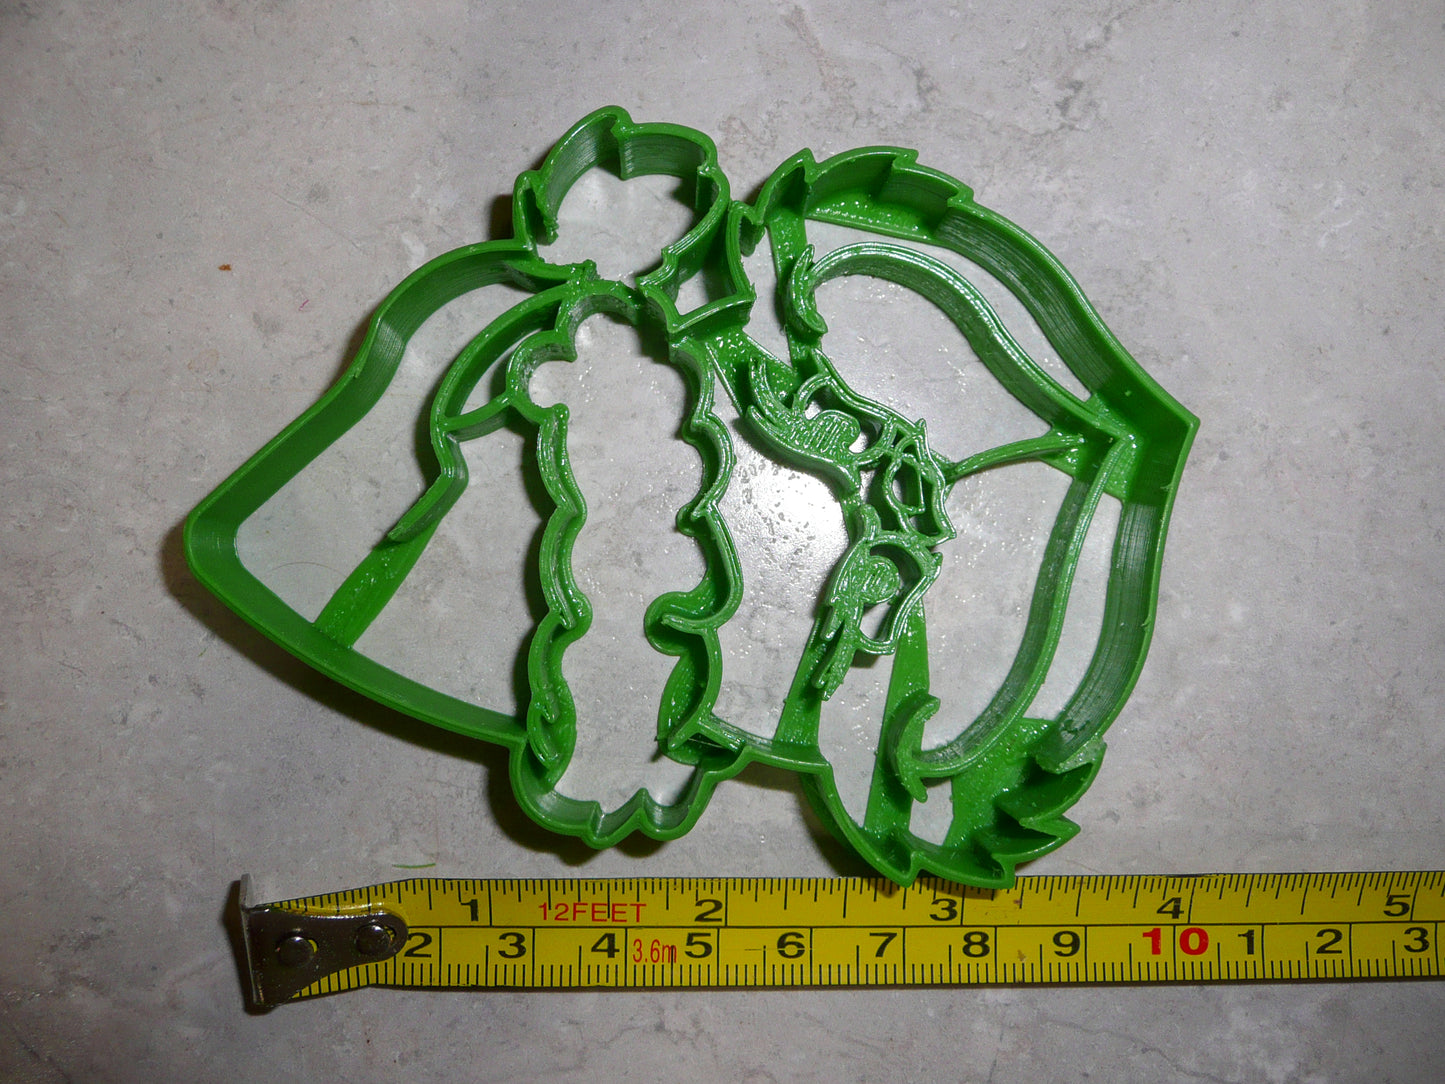 Grinch Face And Dog Max Dr Seuss Christmas Set Of 2 Cookie Cutters USA PR1541